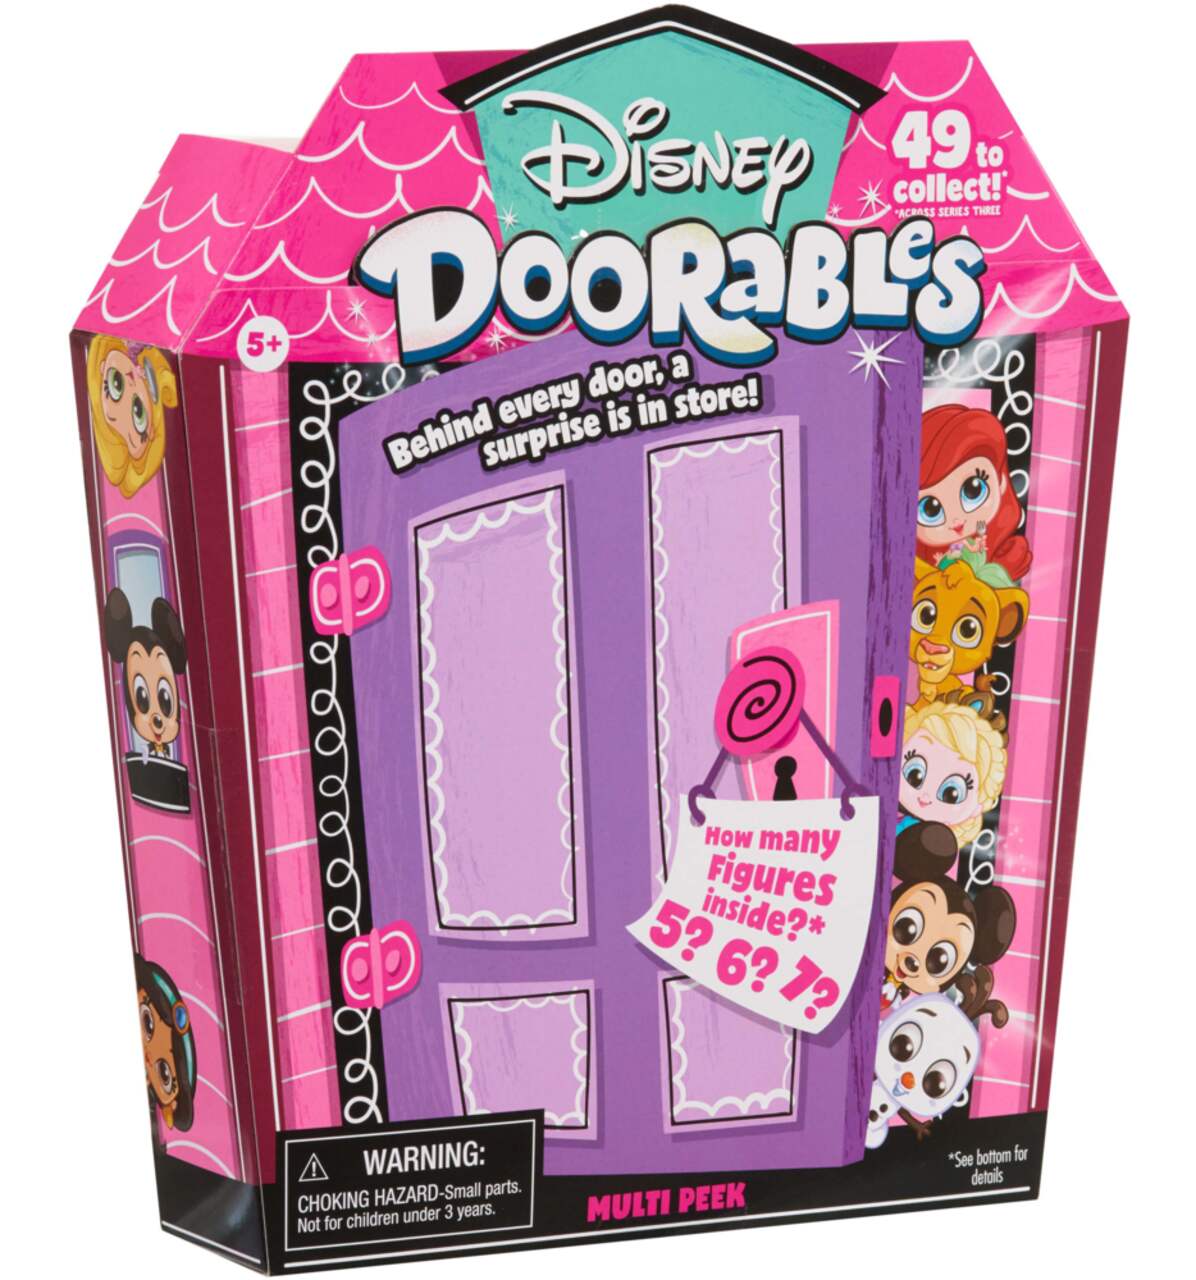 DISNEY DOORABLES PUFFABLES PLUSH SERIES 3 - The Toy Insider